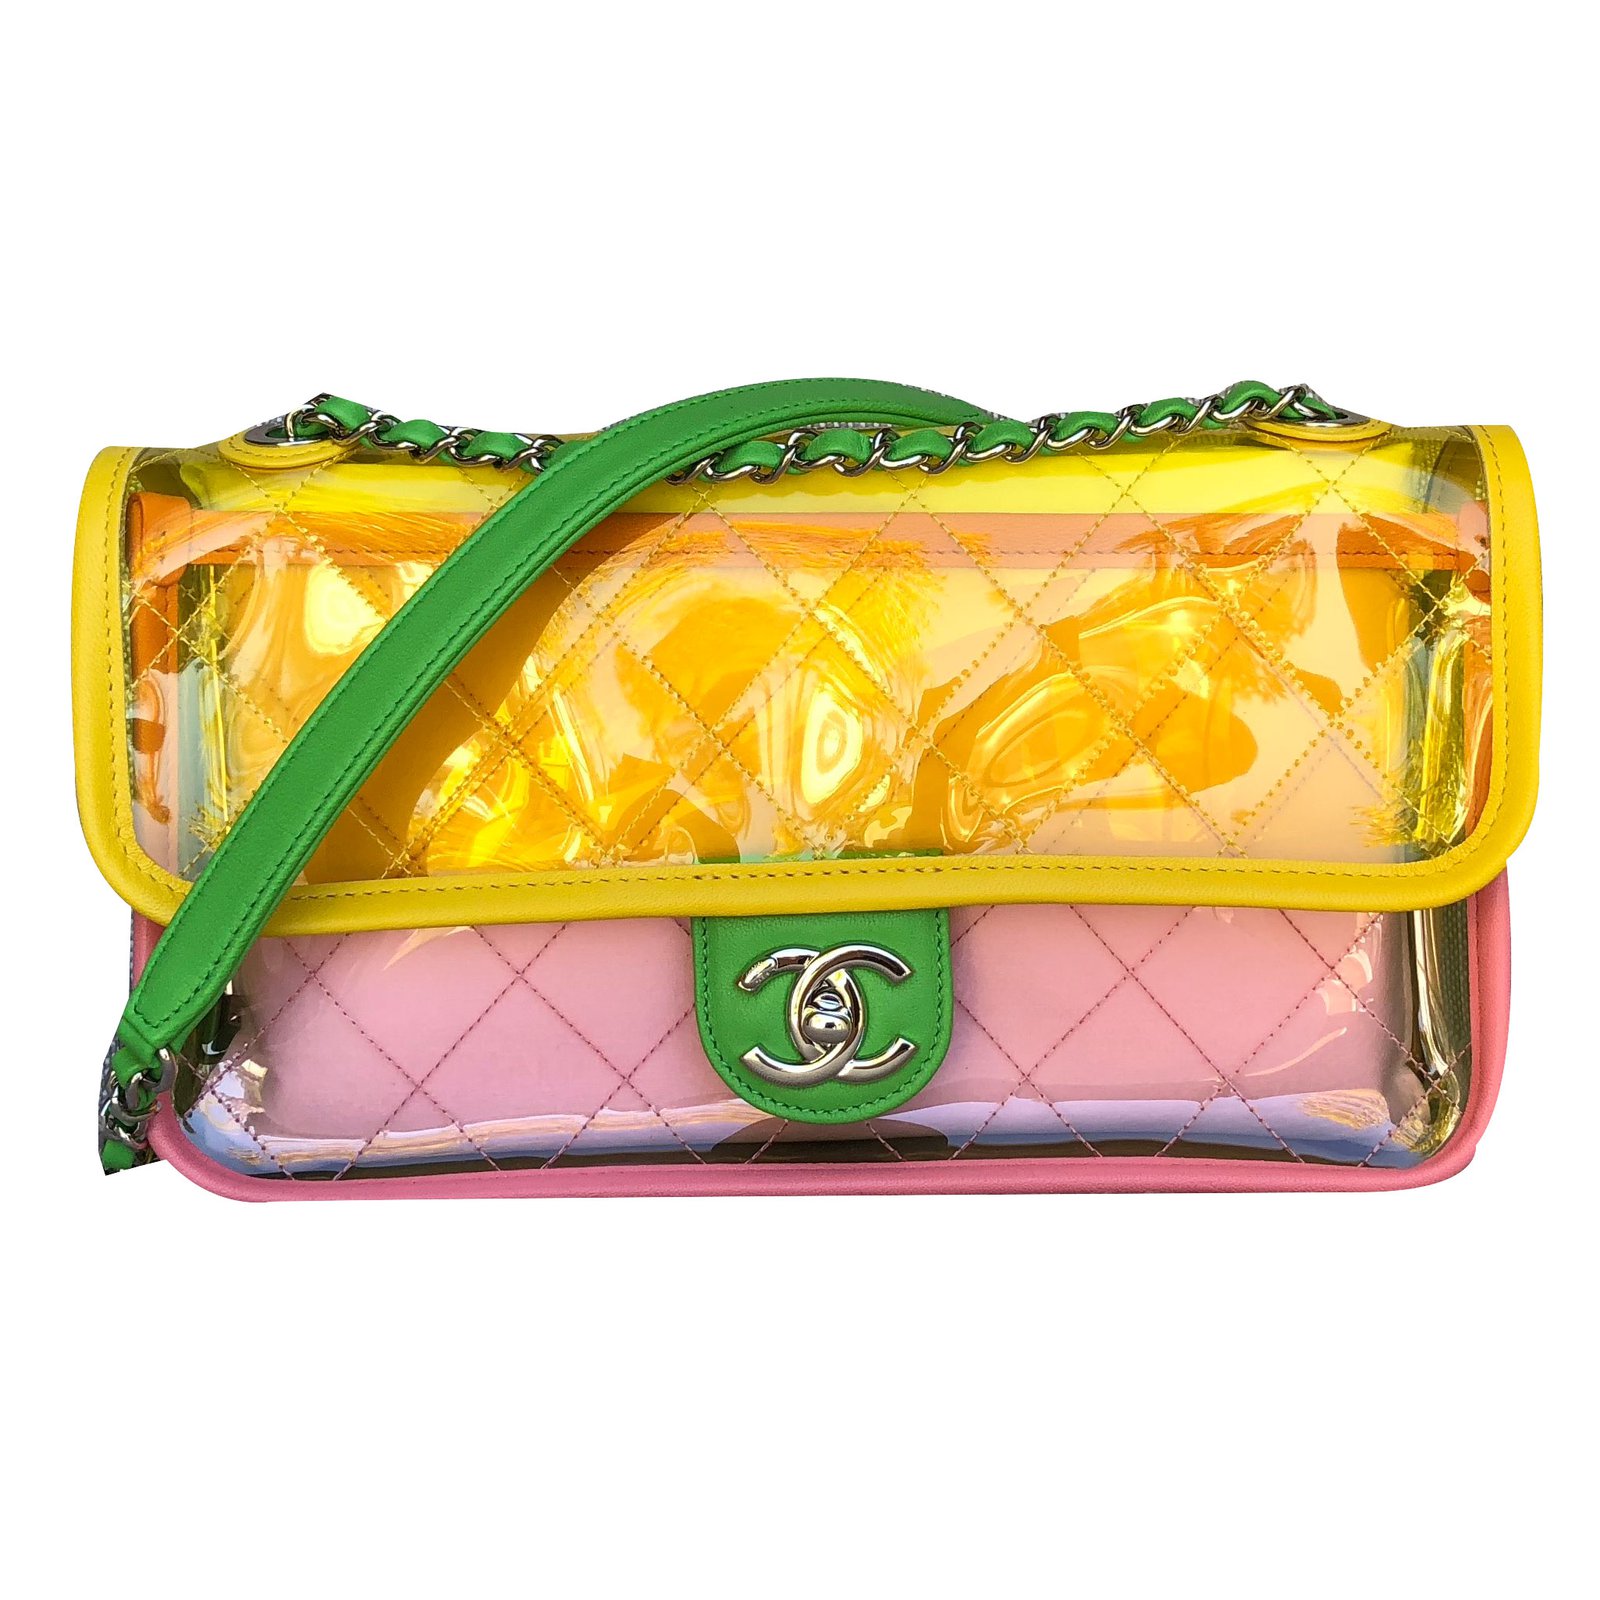 Runway Quilted Single Flap Shiny Silver Chain Green/Yellow/Pink  Pvc/Lambskin Bag